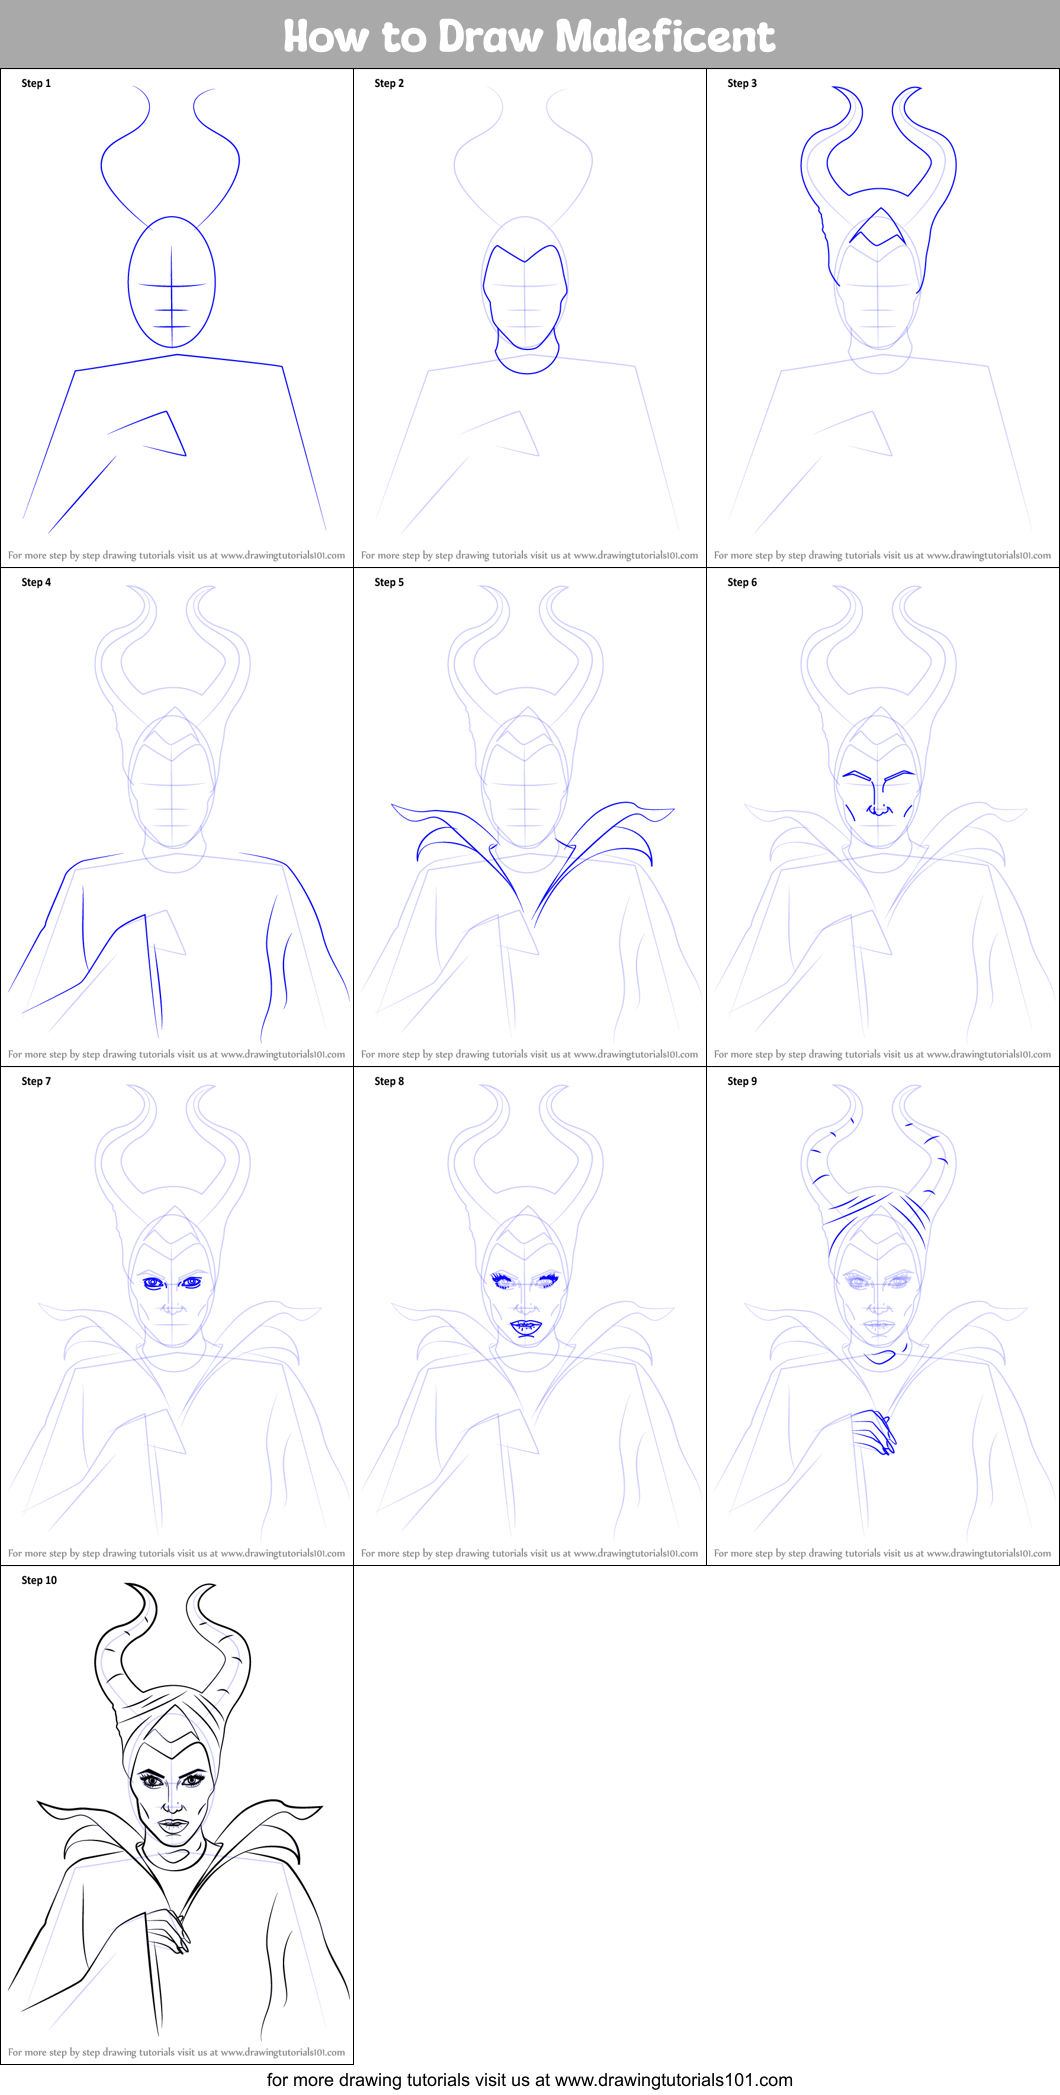 How to Draw Maleficent printable step by step drawing sheet